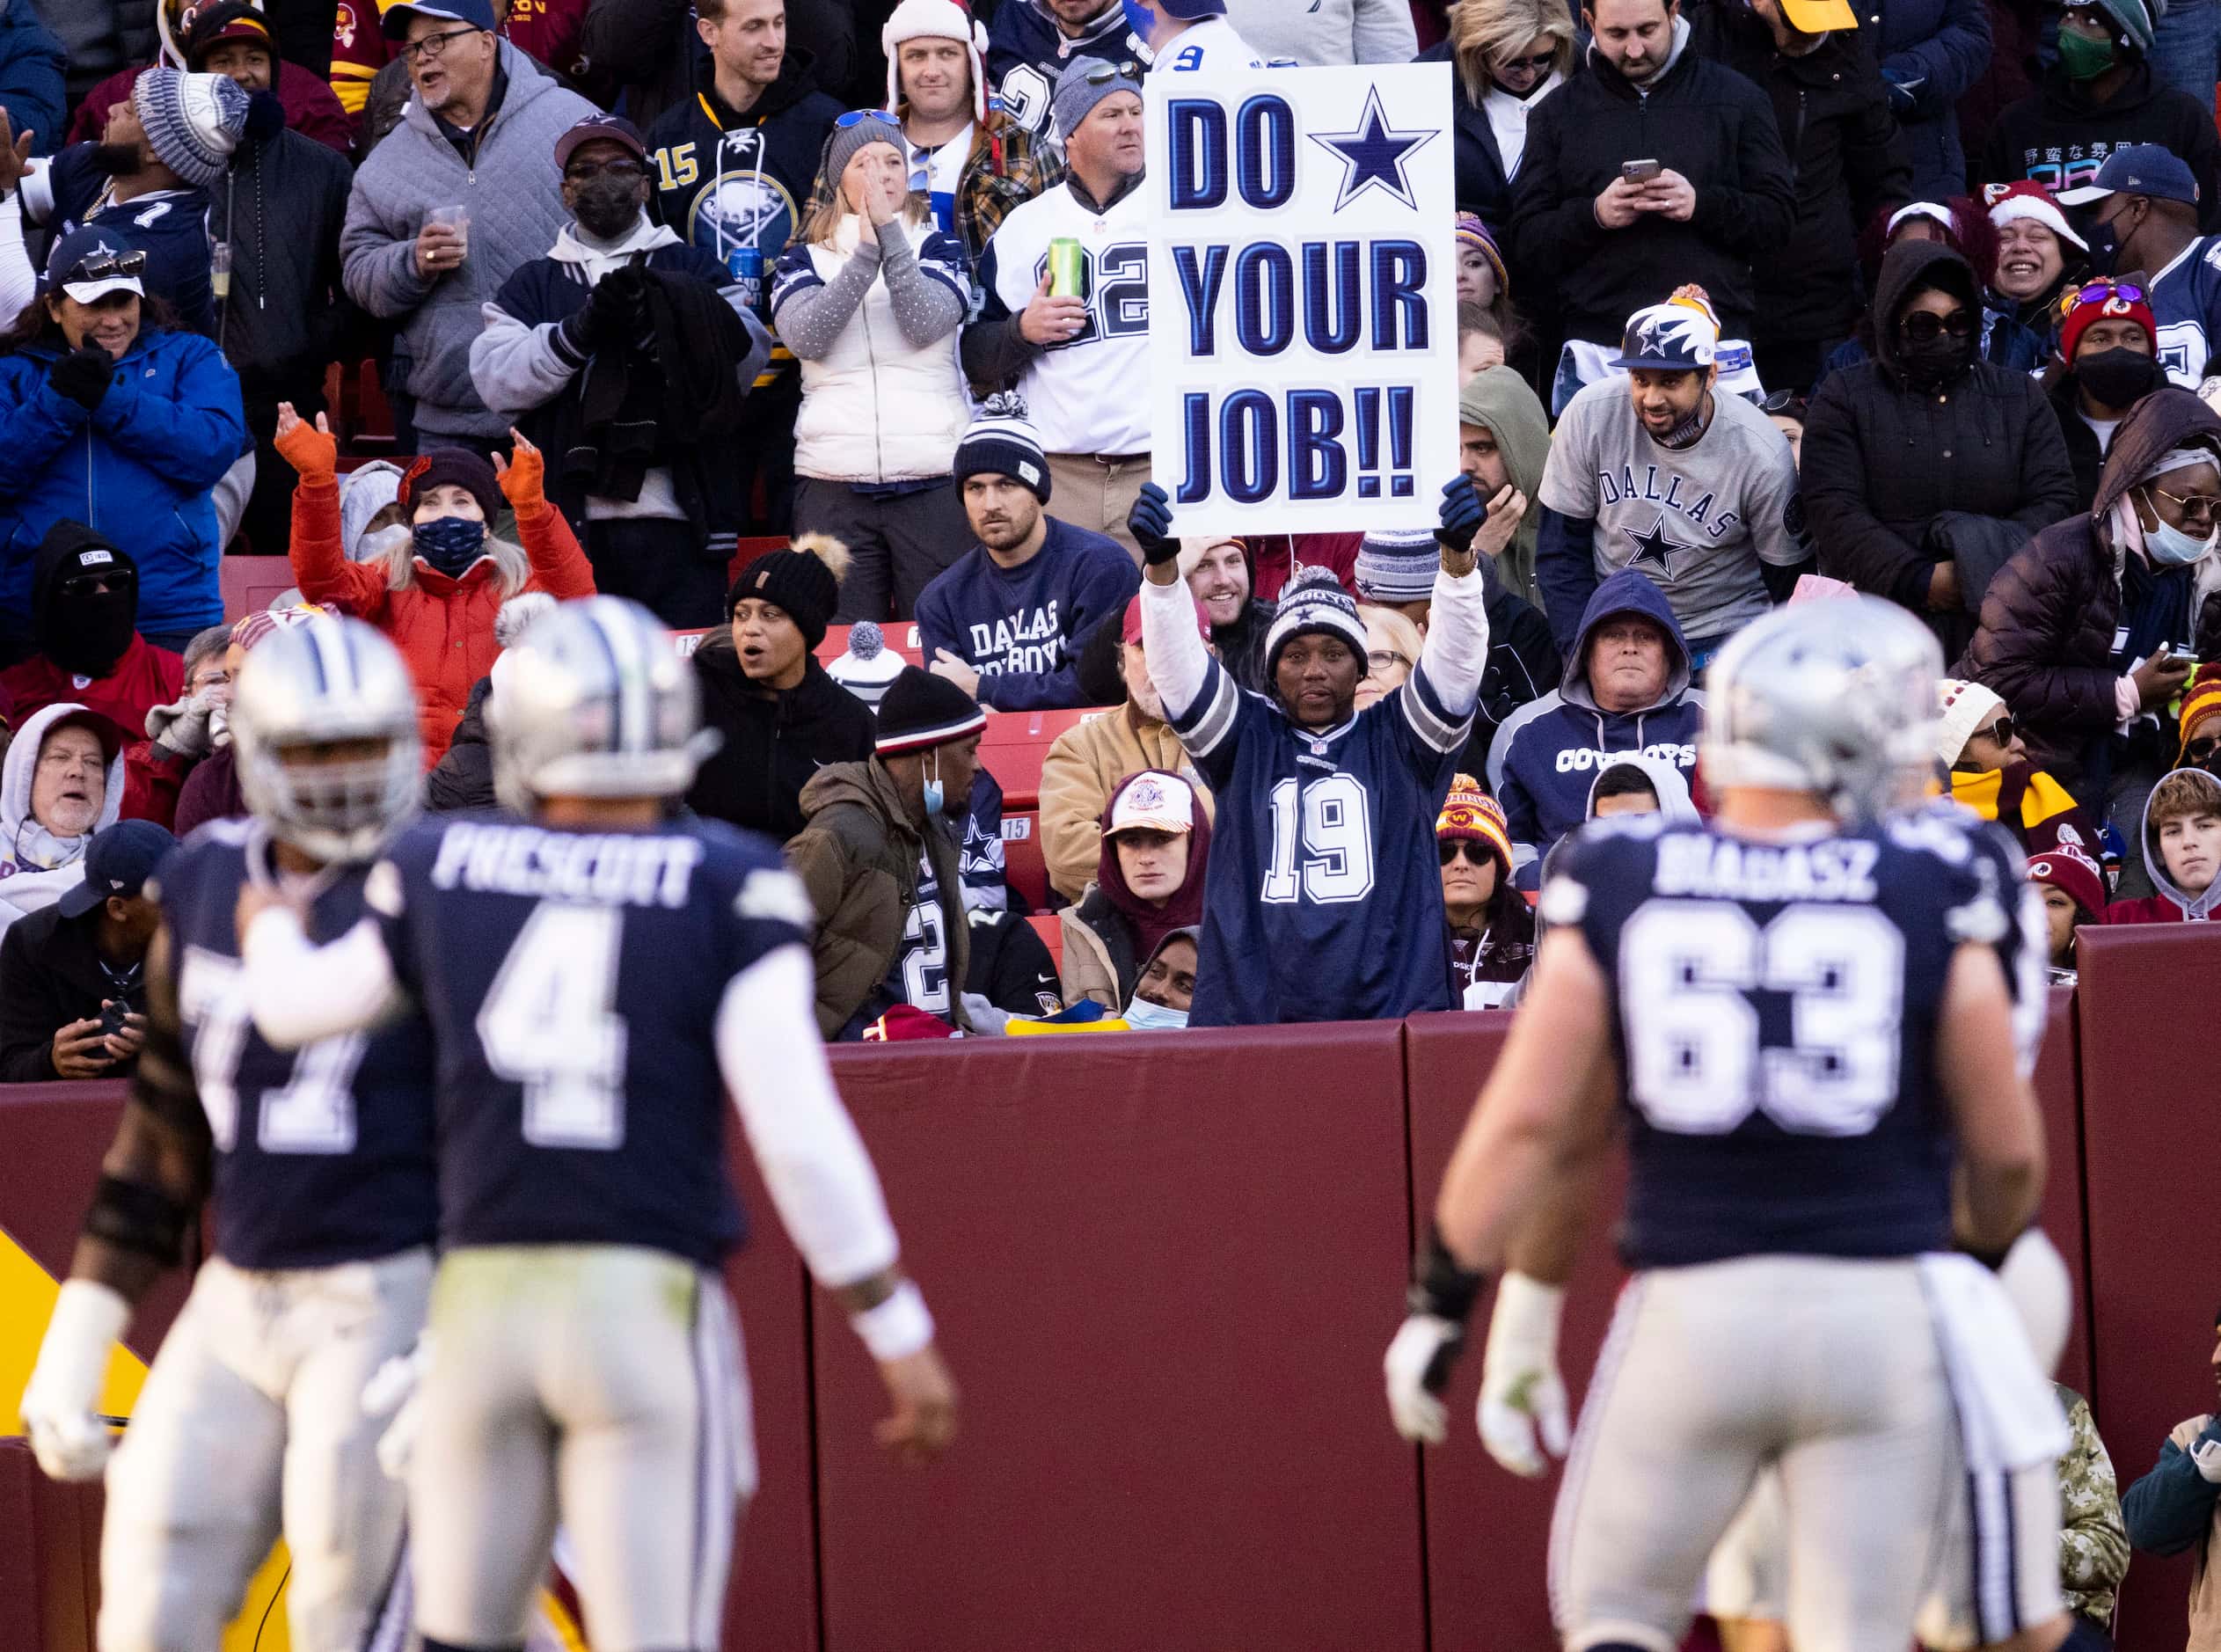 A Dallas Cowboys fan holds a sign saying “DO YOUR JOB” during the third quarter of an NFL...